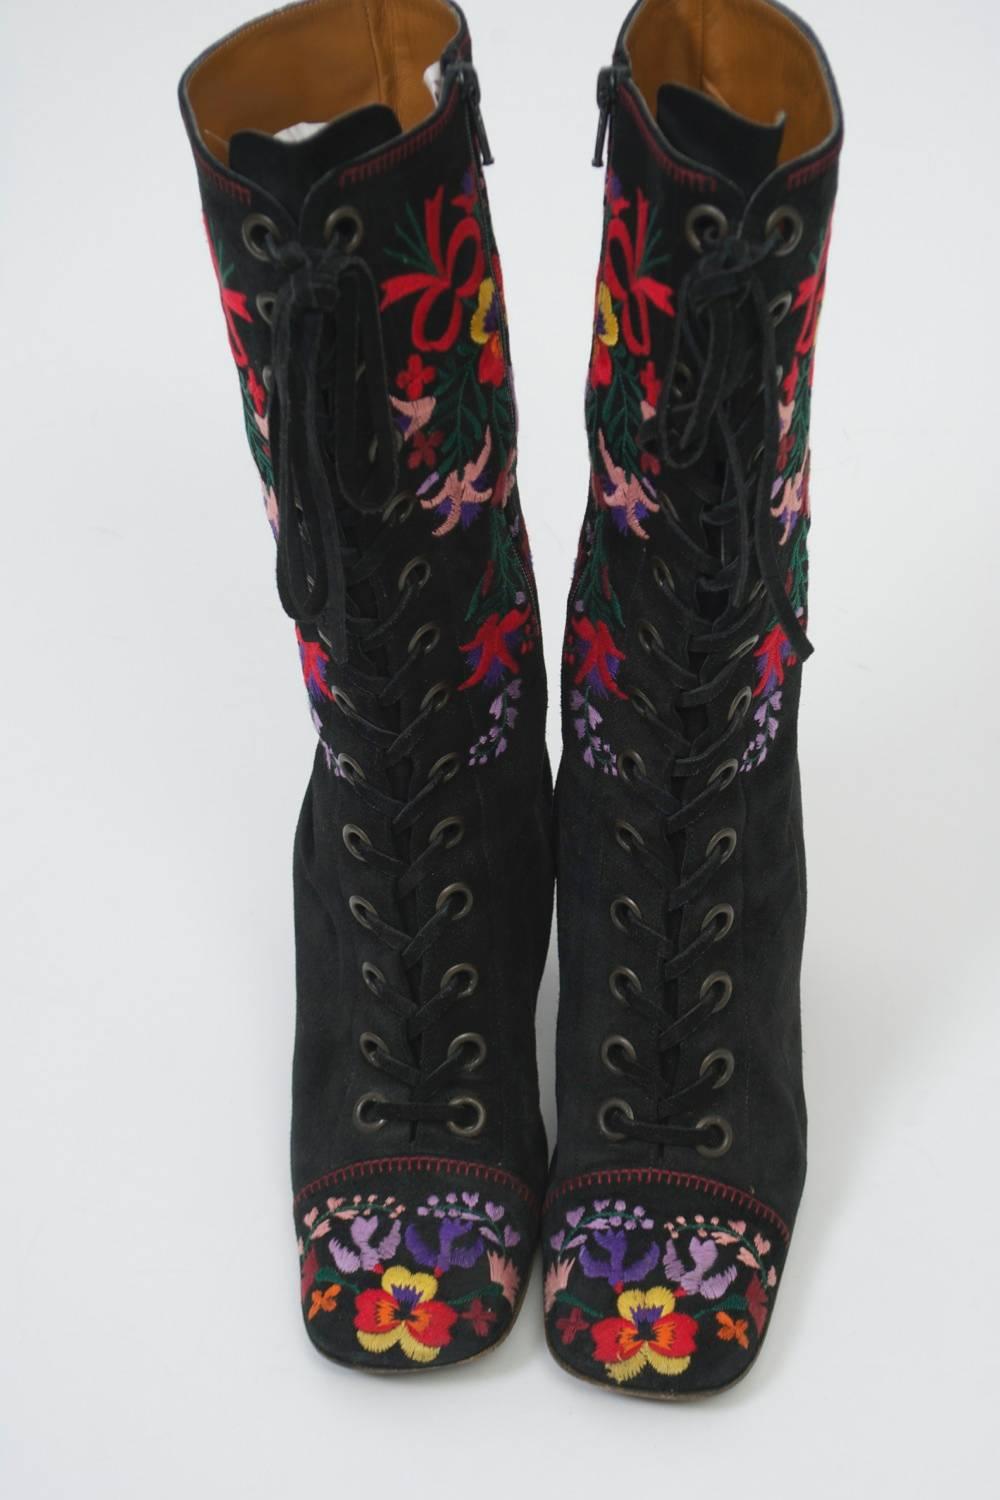 Black suede boots with multicolored embroidered on legs and toe cap. Mid-calf length with thick heel. Inside zipper with front faux laces. Tan leather interior.